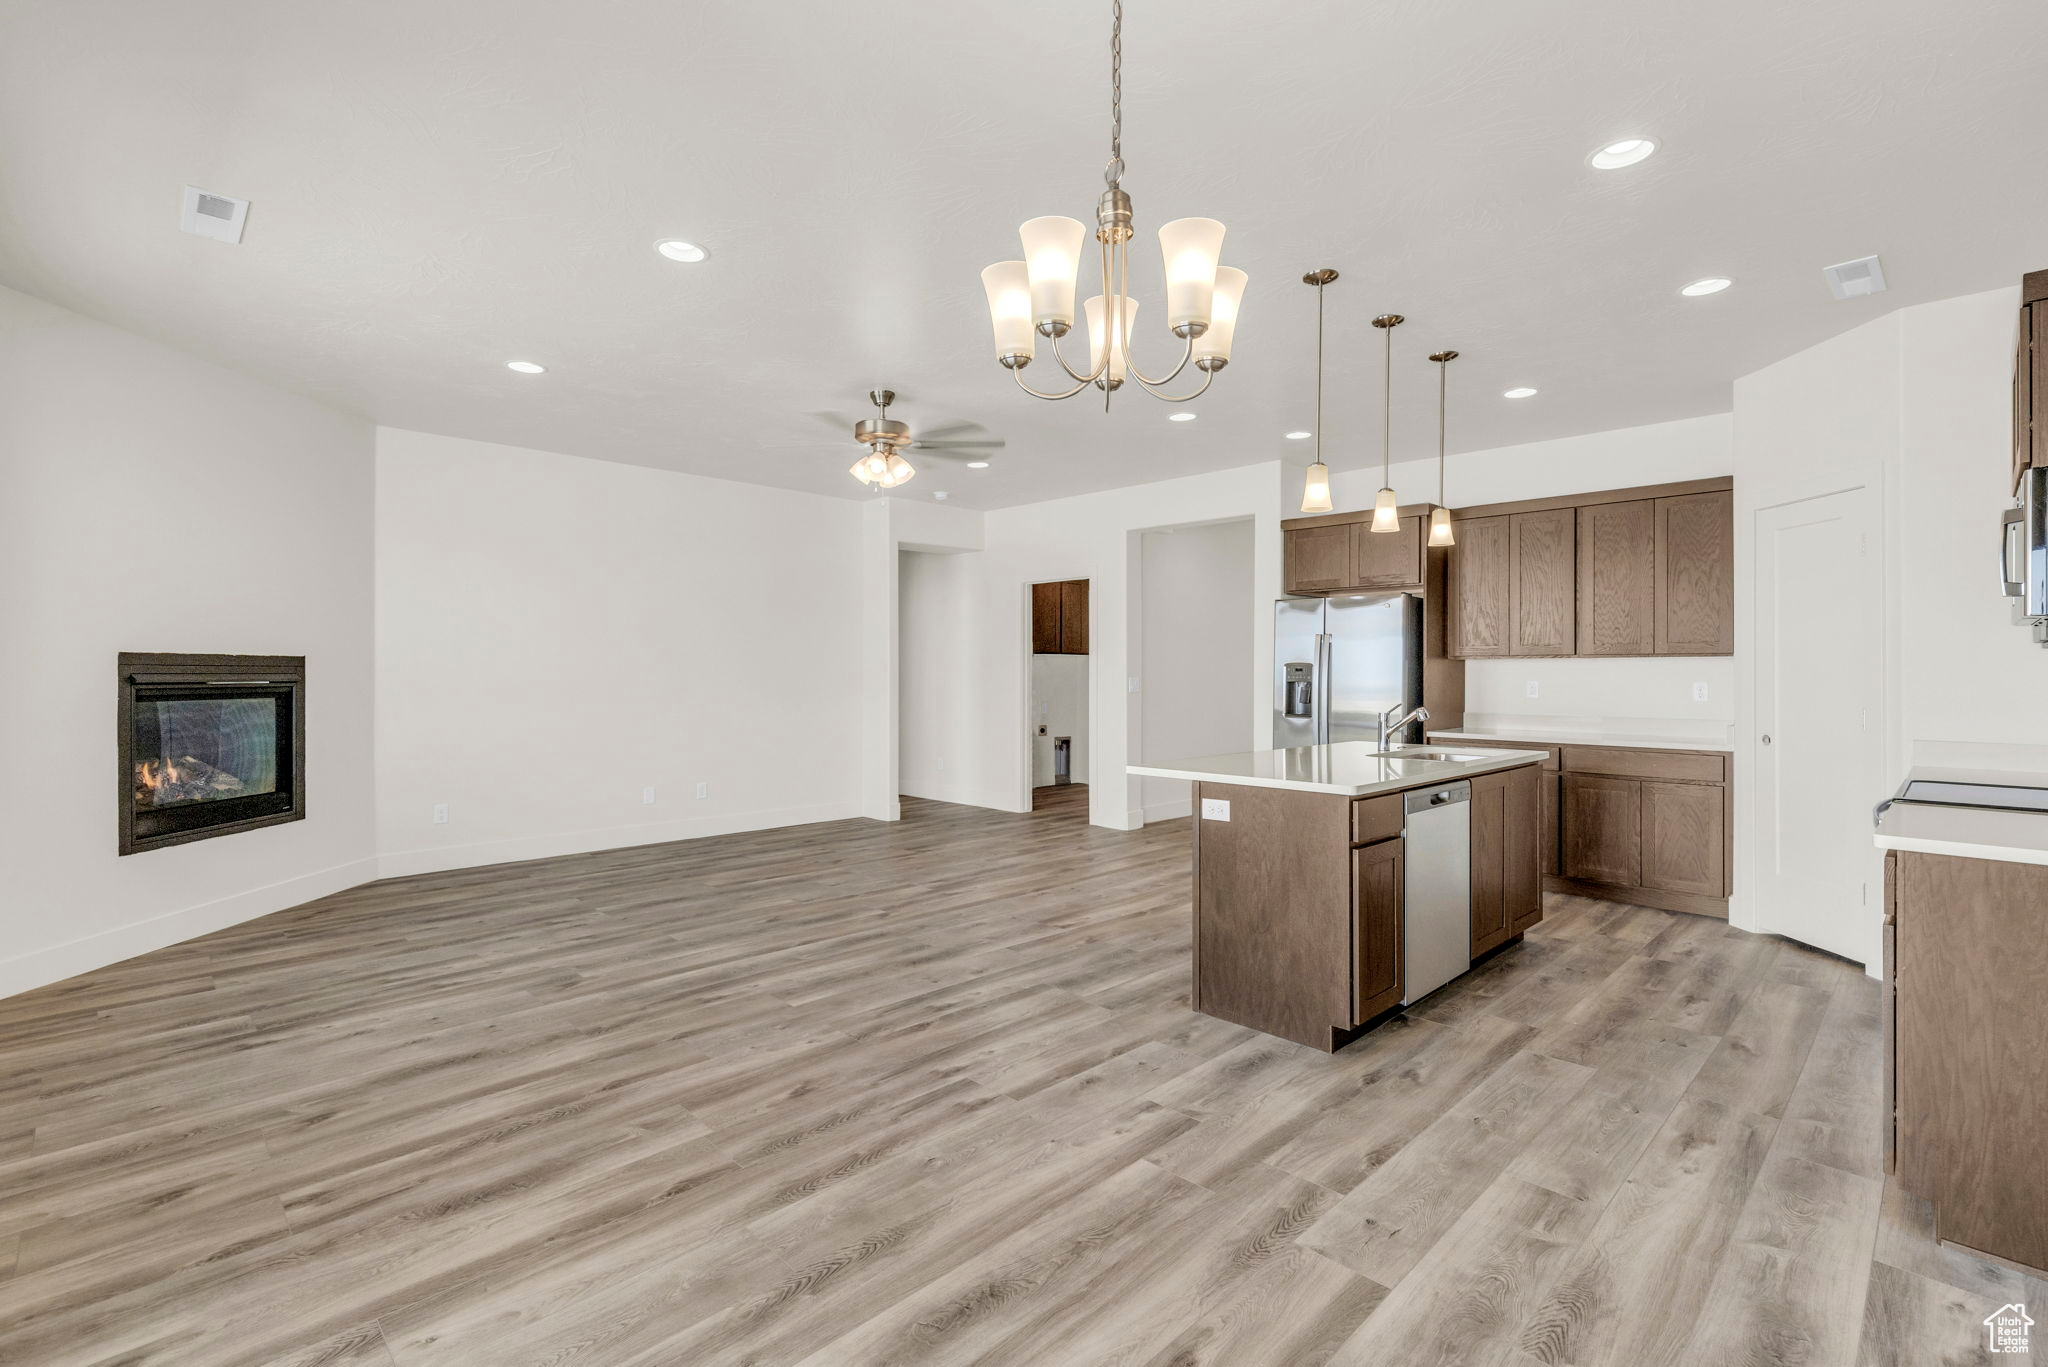 Kitchen featuring light hardwood / wood-style flooring, a kitchen island with sink, ceiling fan with notable chandelier, stainless steel appliances, and pendant lighting